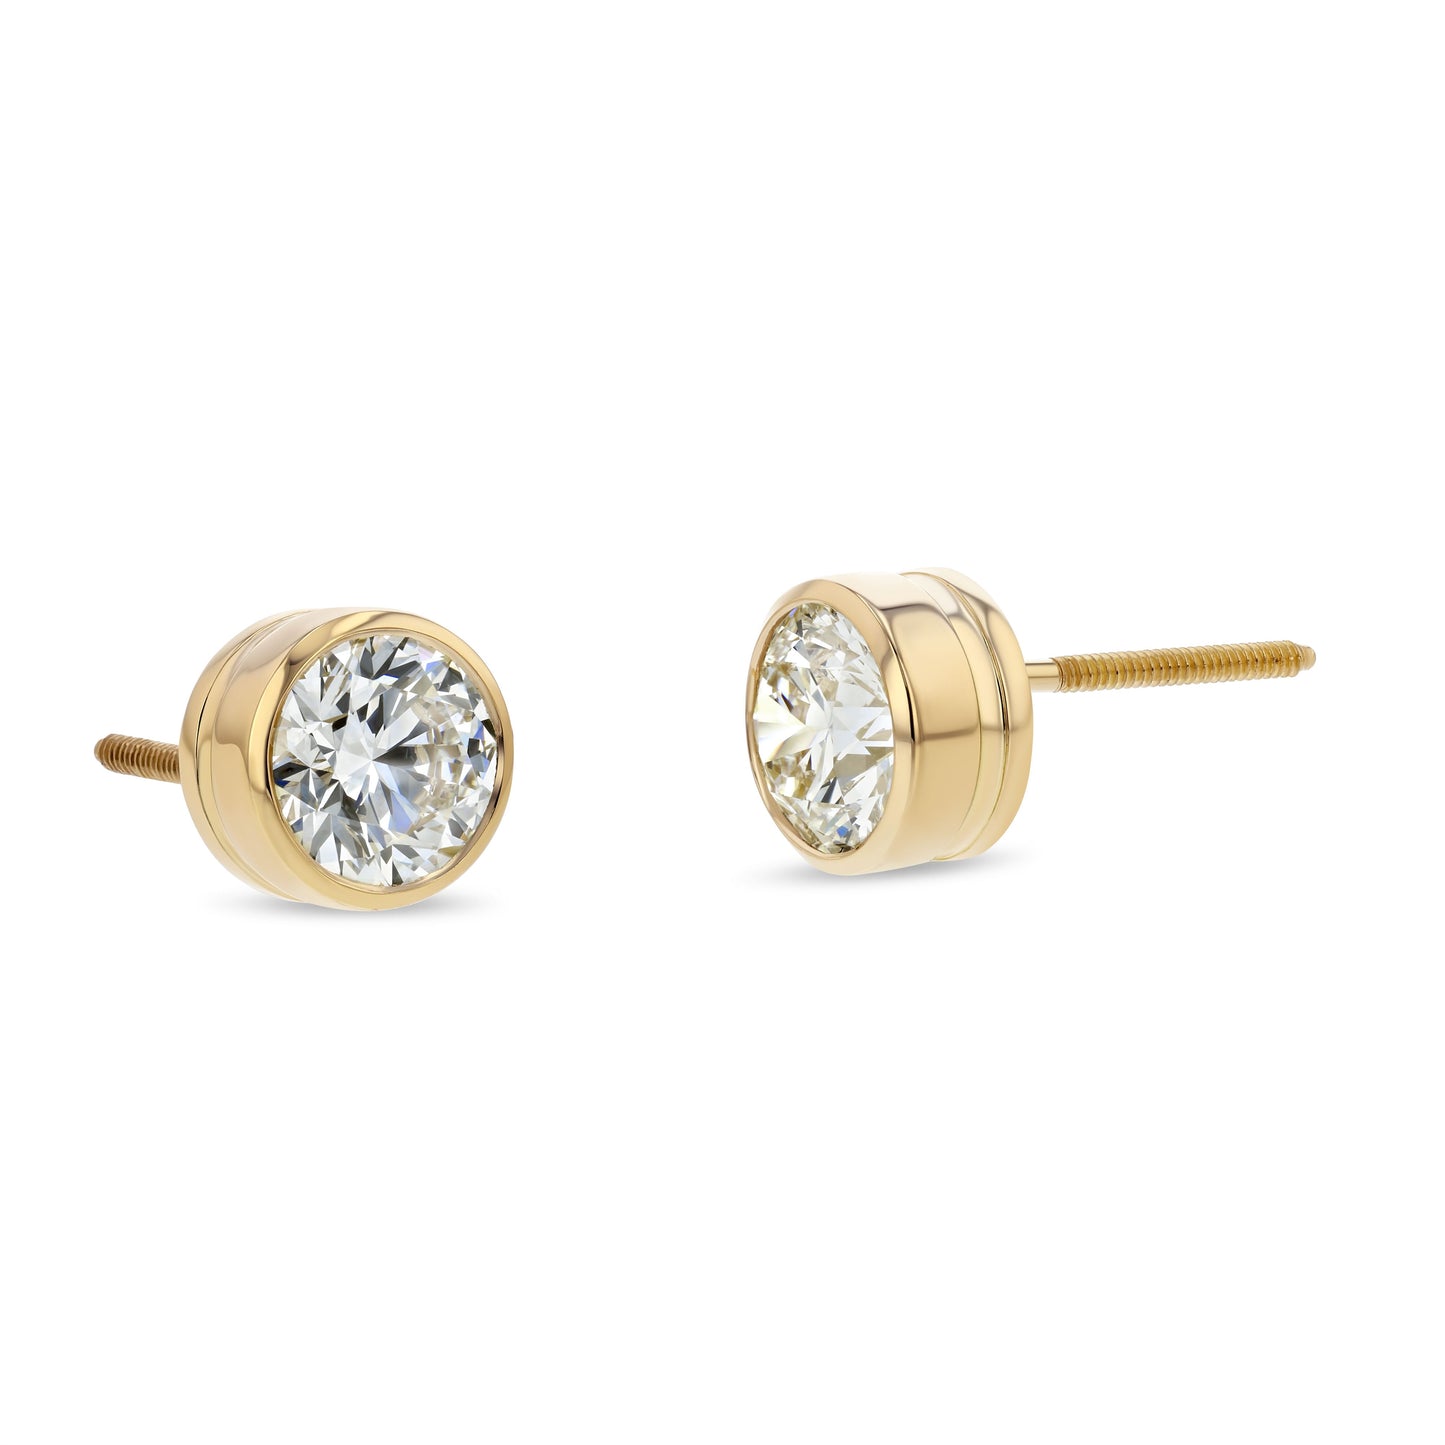 18k Yellow Gold Bezel Round Diamond Stud Earrings 1ctw (5.2mm Ea), H Color, Si3-i1 Clarity